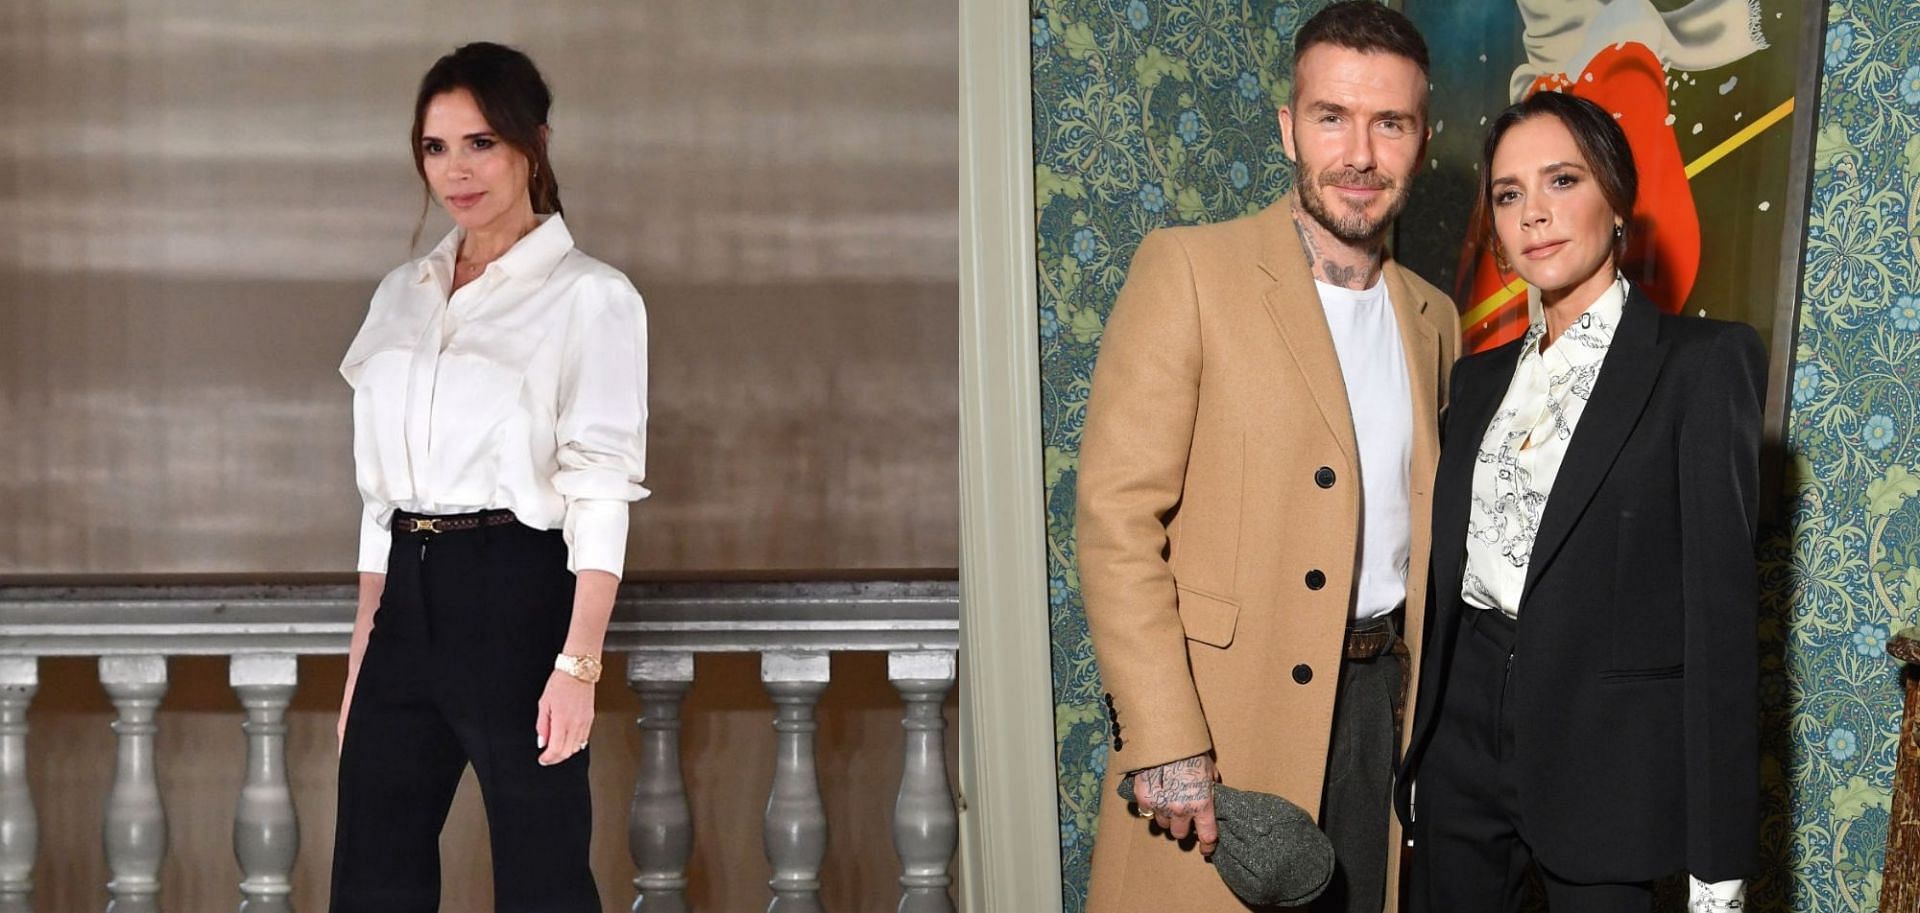 David Beckham revealed that Victoria Beckham has been eating the same meal for 25 years (Image via Gareth Cattermole/Getty Images and Victor Boyko/Getty Images)